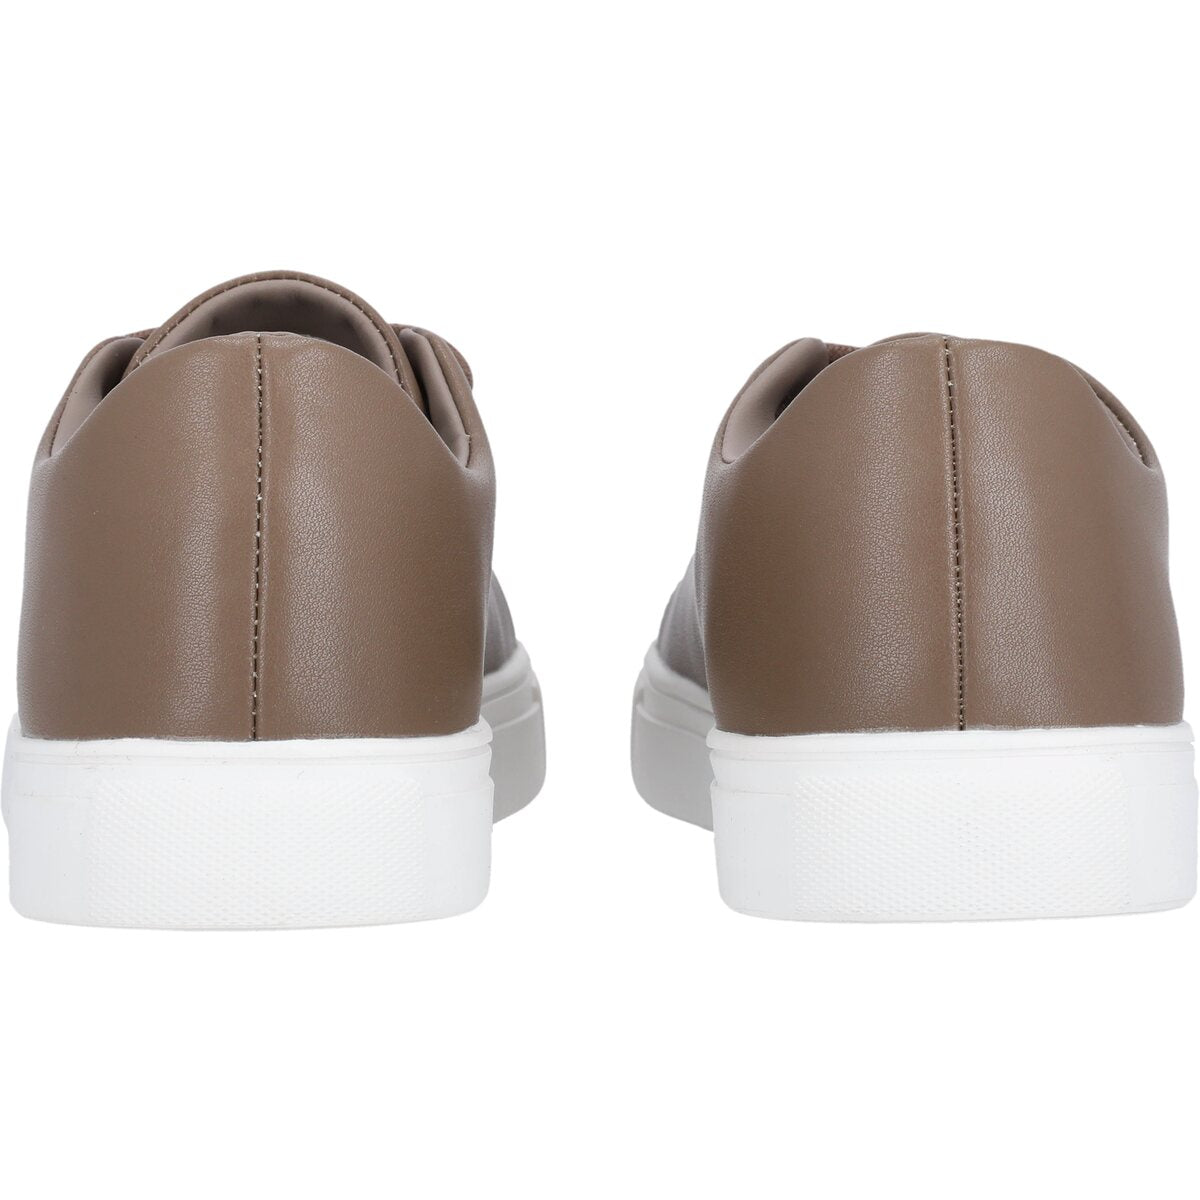 Athlecia Christinia Classic Sneakers - Taupe 3 Shaws Department Stores